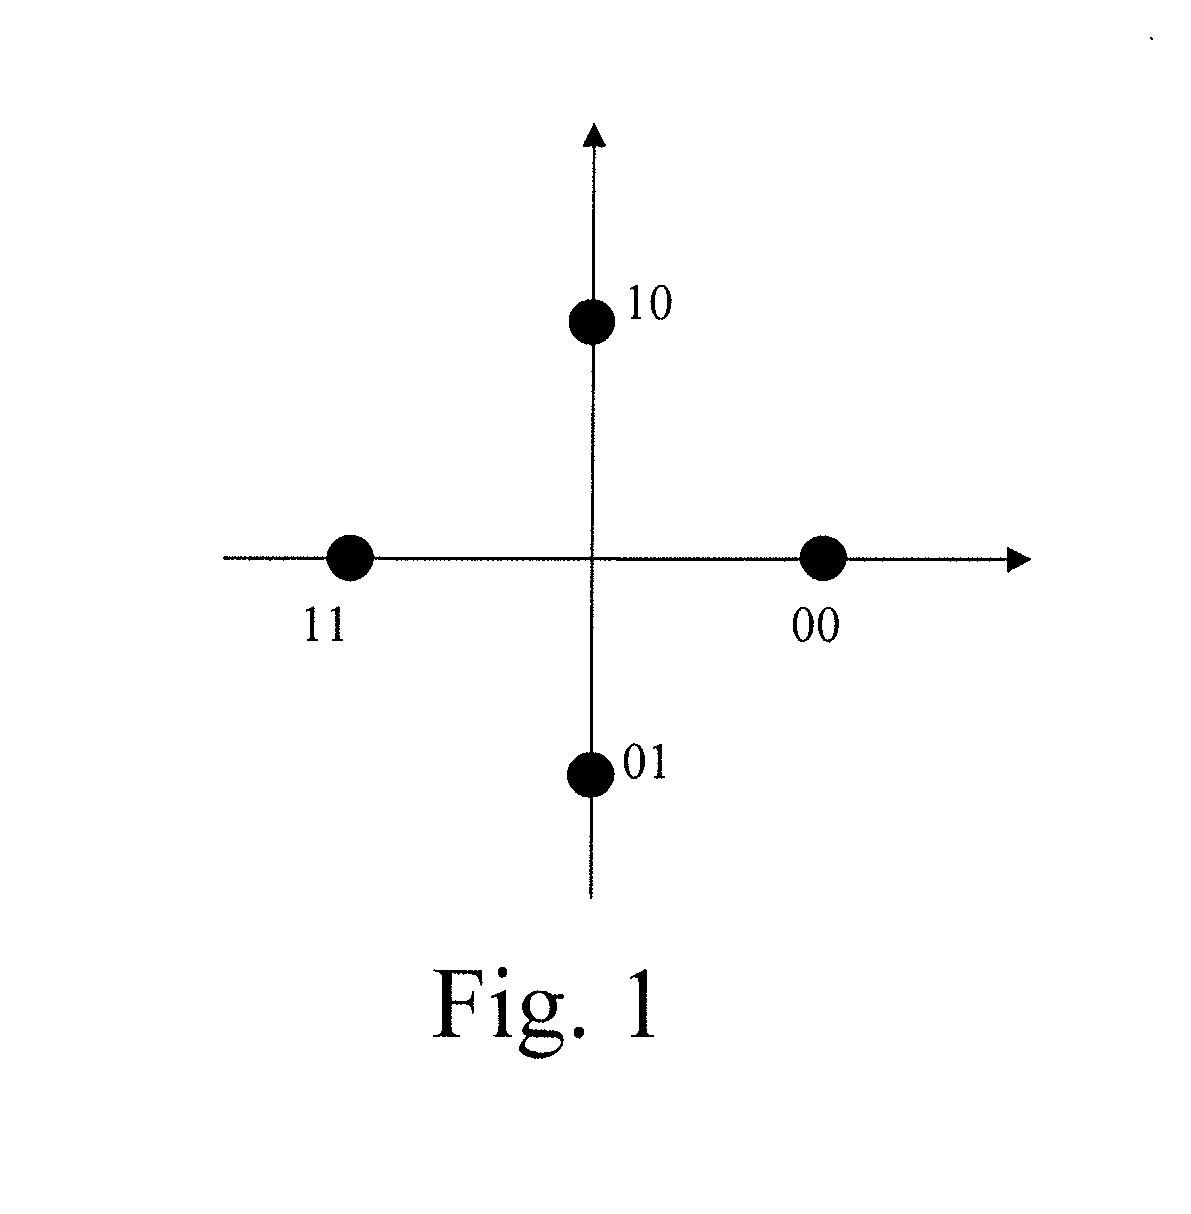 Feedback information relating to a mobile communications system using carrier aggreregation